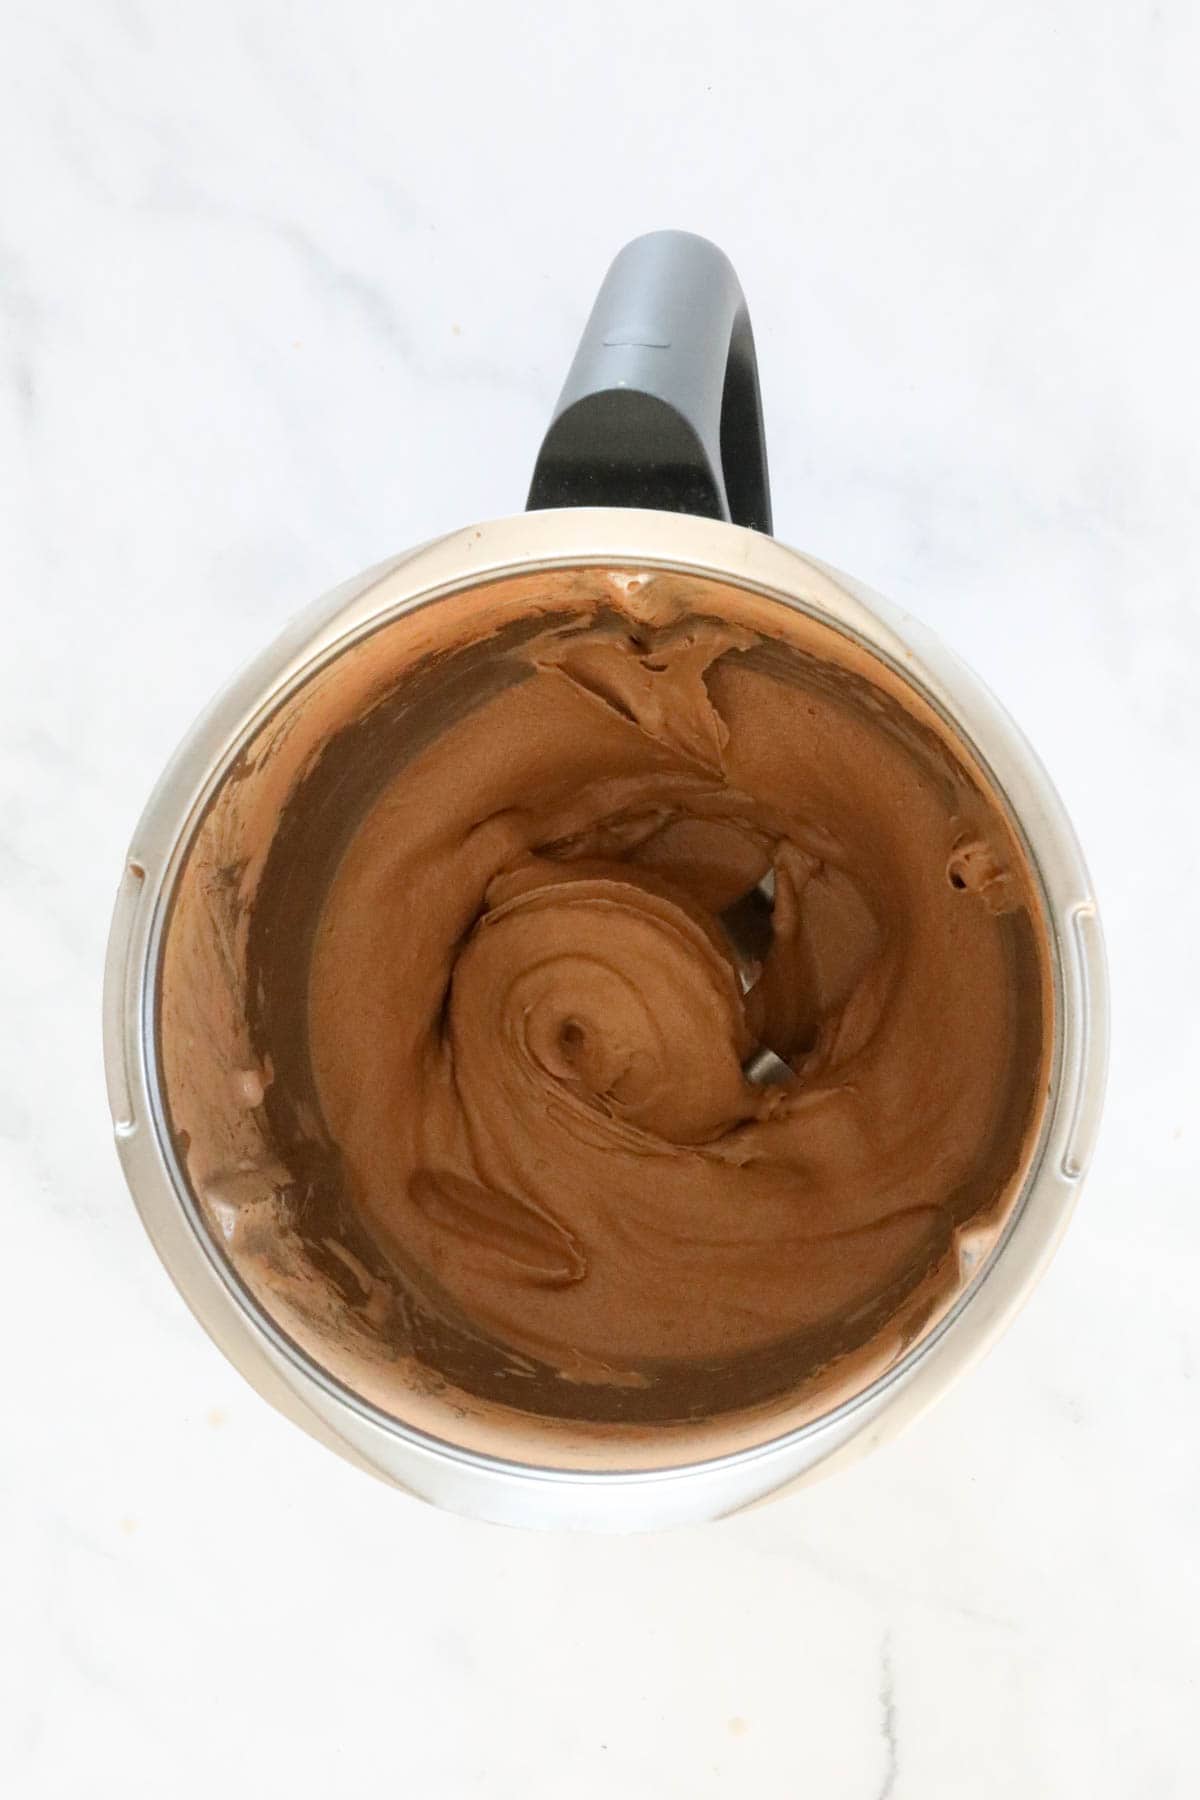 Chocolate peanut butter ice cream in a Thermomix.